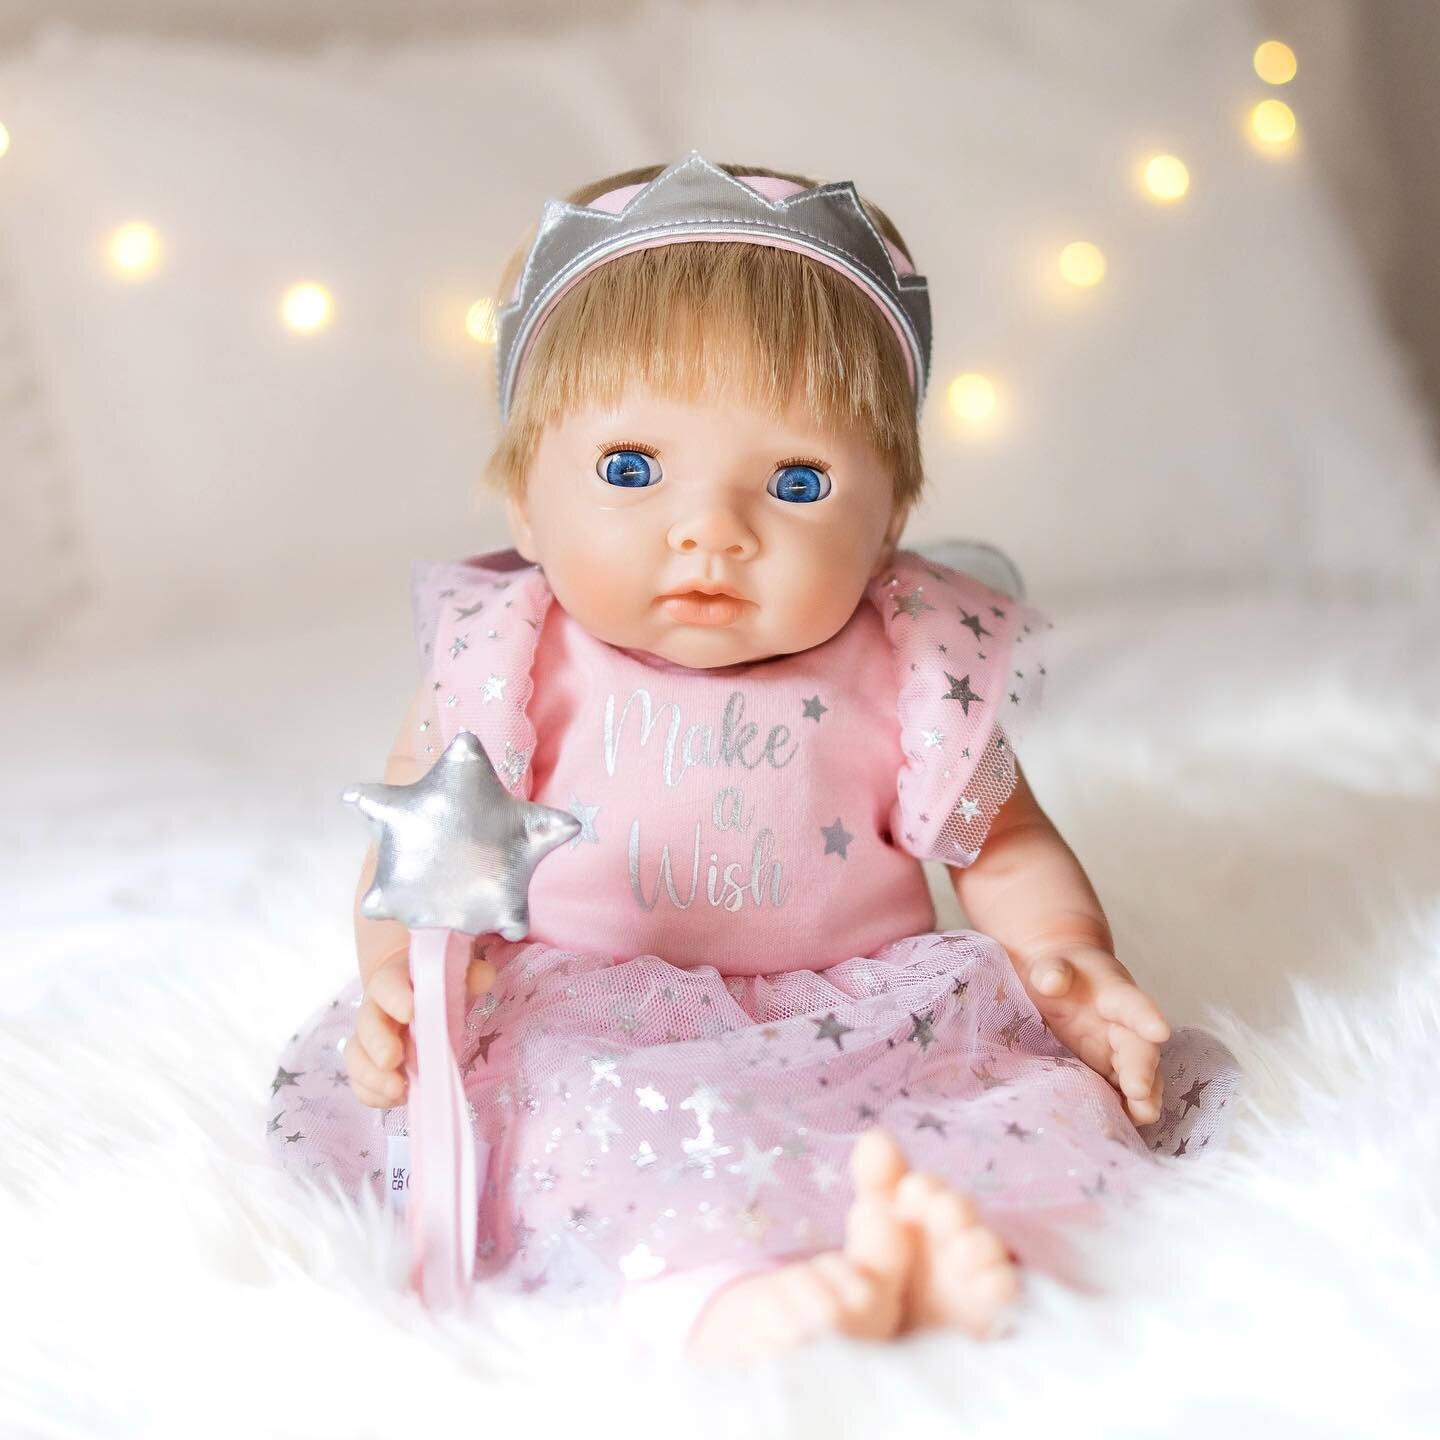 Time to spread a bit of magic and dress your little Tiny Treasures baby doll in this adorable Make A Wish Fairy Outfit for some magical role play fun!

Shop the Tiny Treasures Christmas collection now at Argos ✨

#tinytreasures #dolls #doll #dollstag